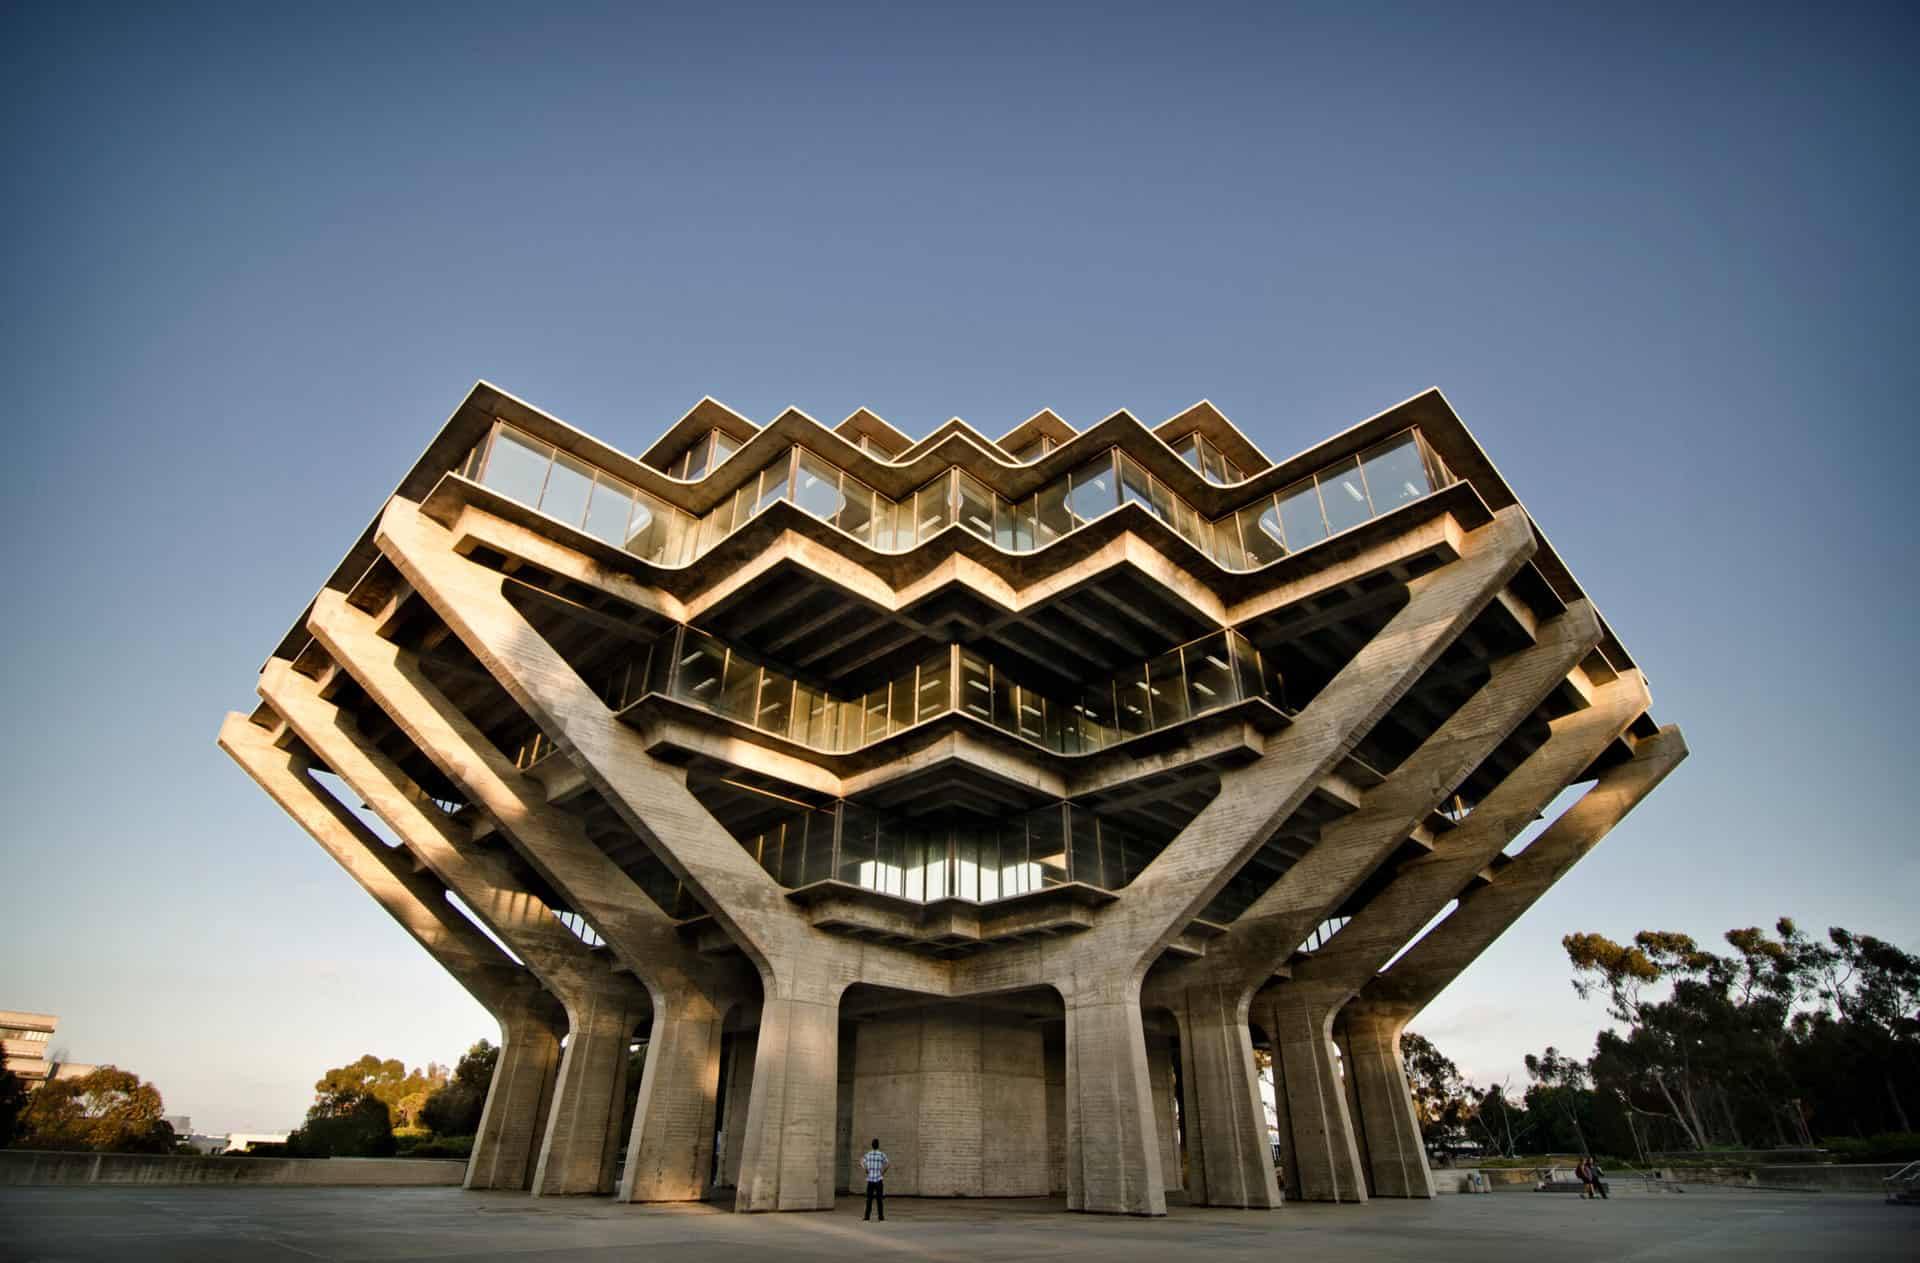 Image Credit: Geisel Library